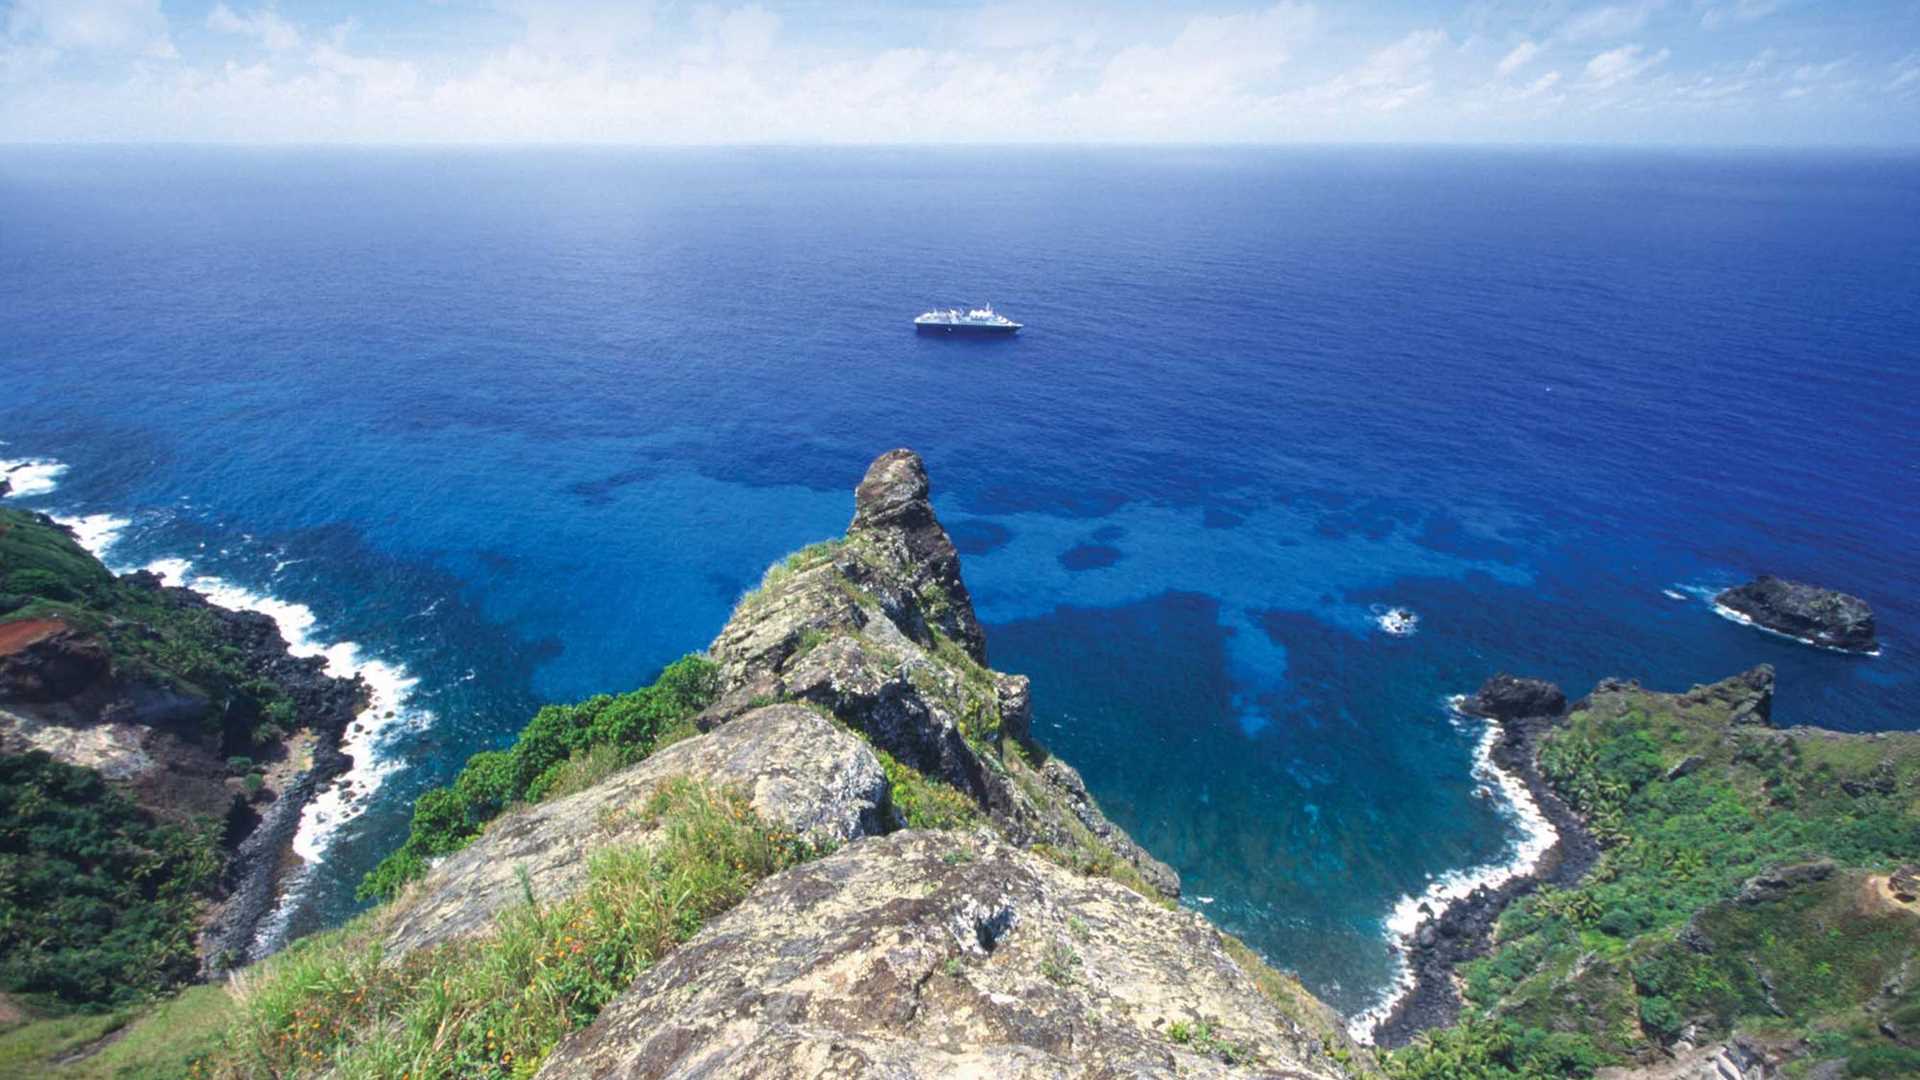 A Lindblad expedition ship anchors off the coast of Pitcairn Island